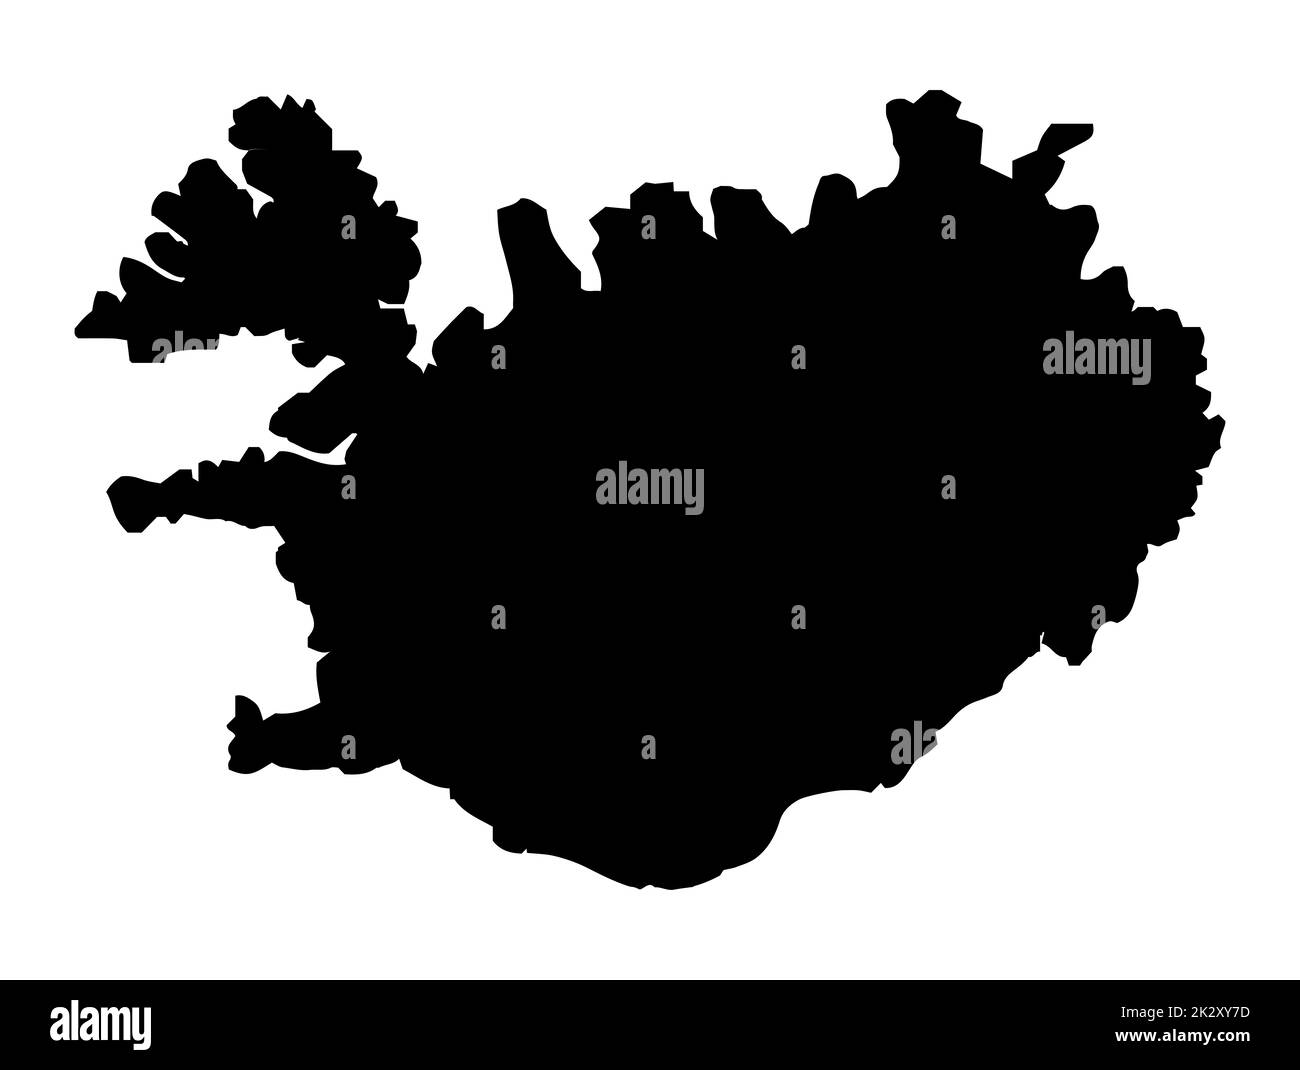 Iceland Silhouette Map Stock Photo